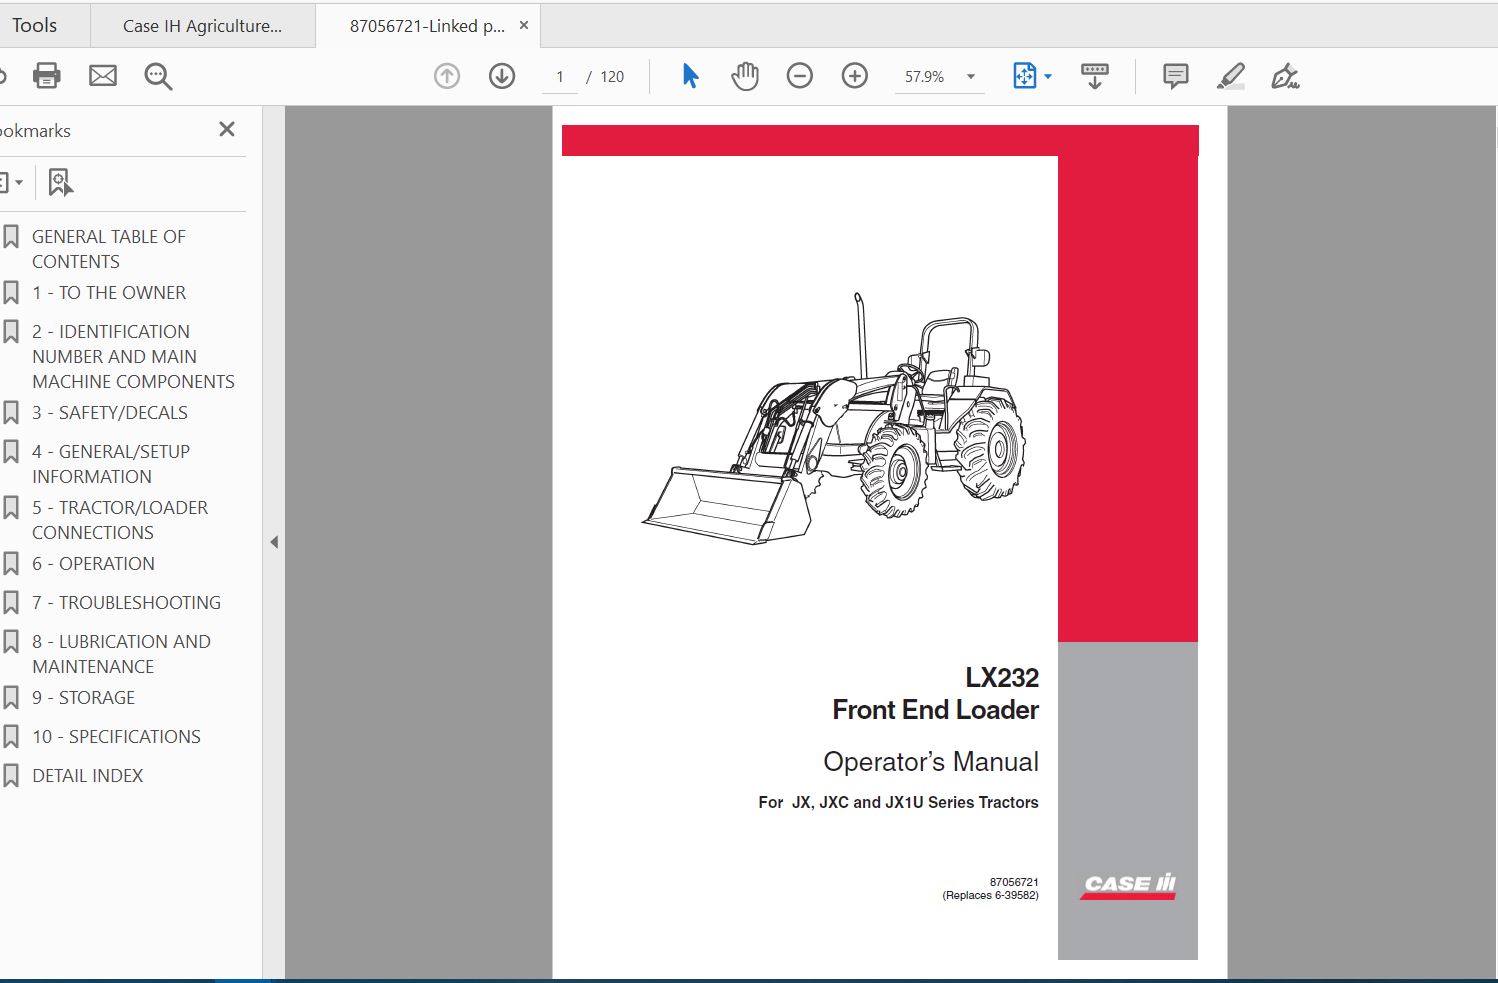 Case IH Tractor LX232 Front End Loader Operator's Manual_87056721